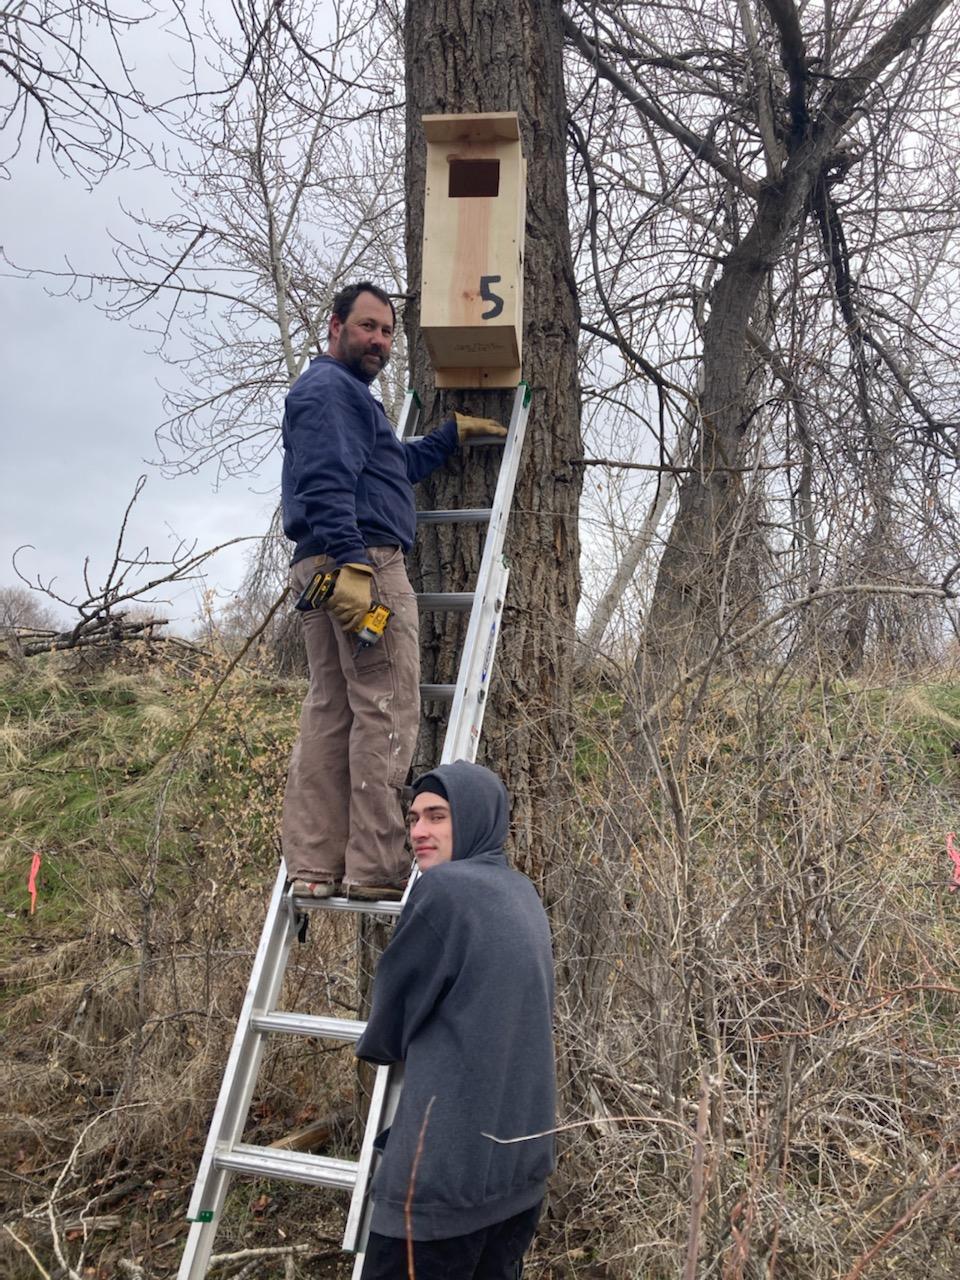 a father and son smile at the camera while hanging a nest box. The teenage son stands holding a ladder while the father climbs up to the box holding a drill